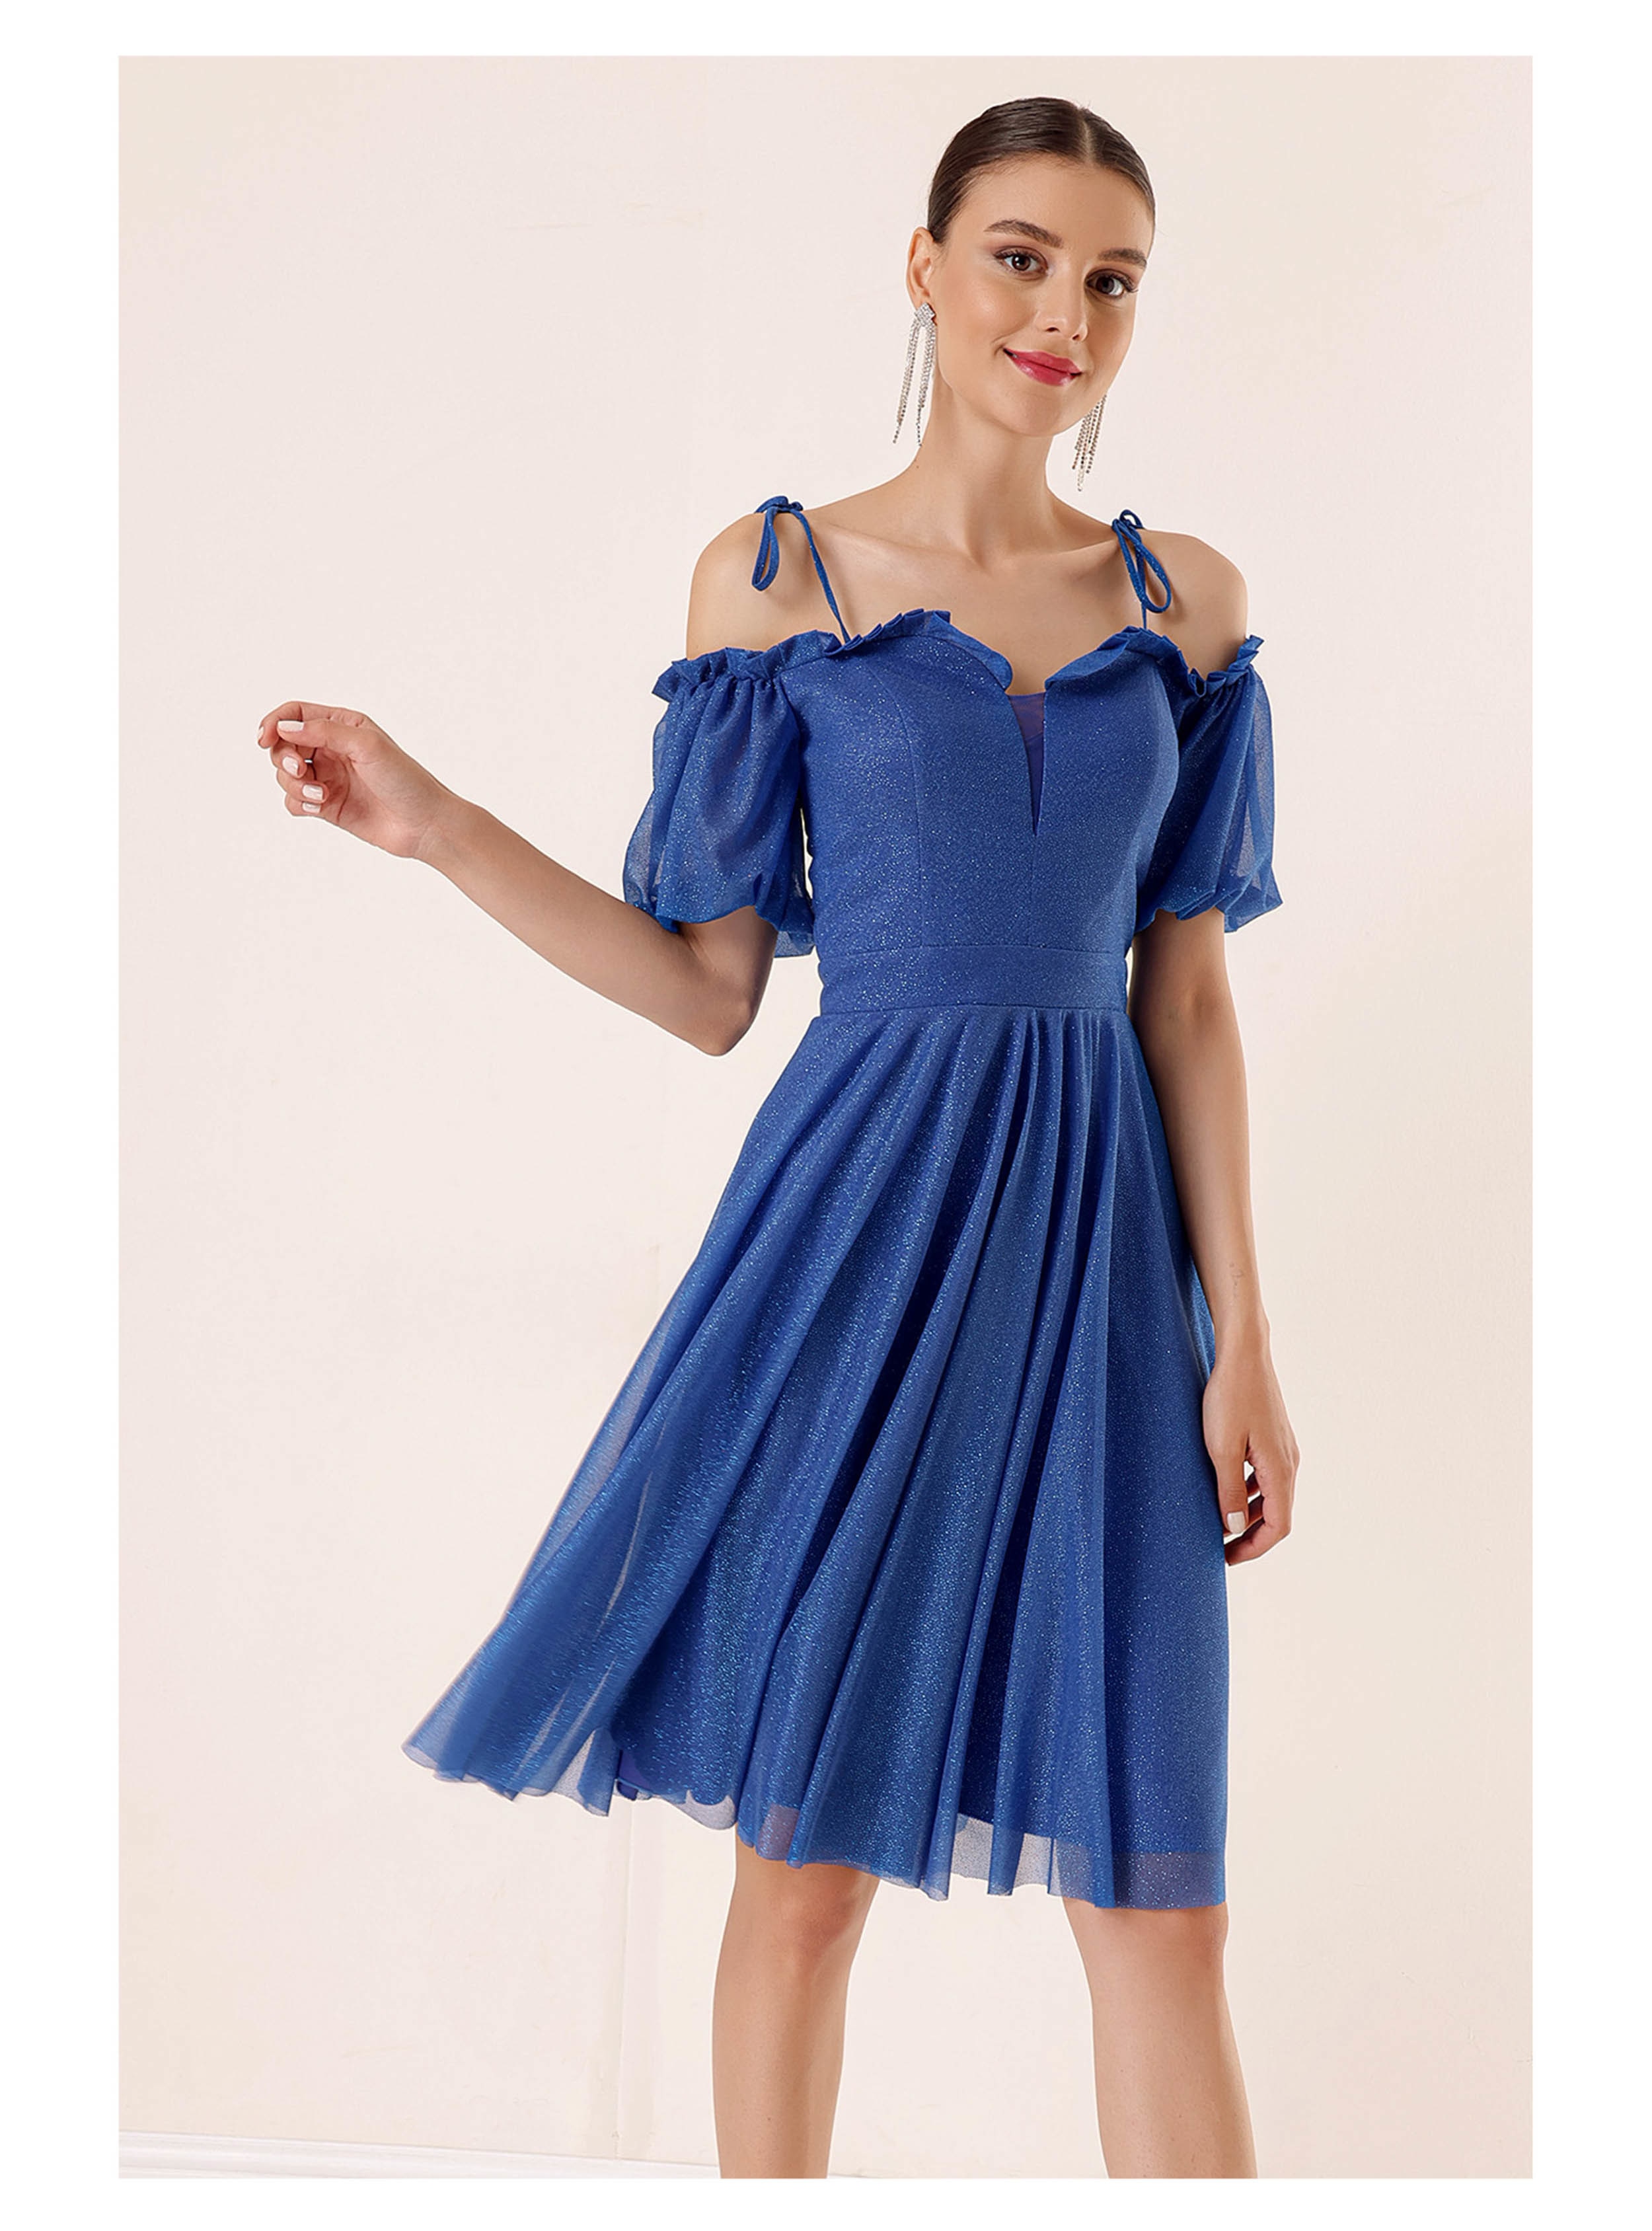 Fully Lined - Saxe Blue - Evening Dresses